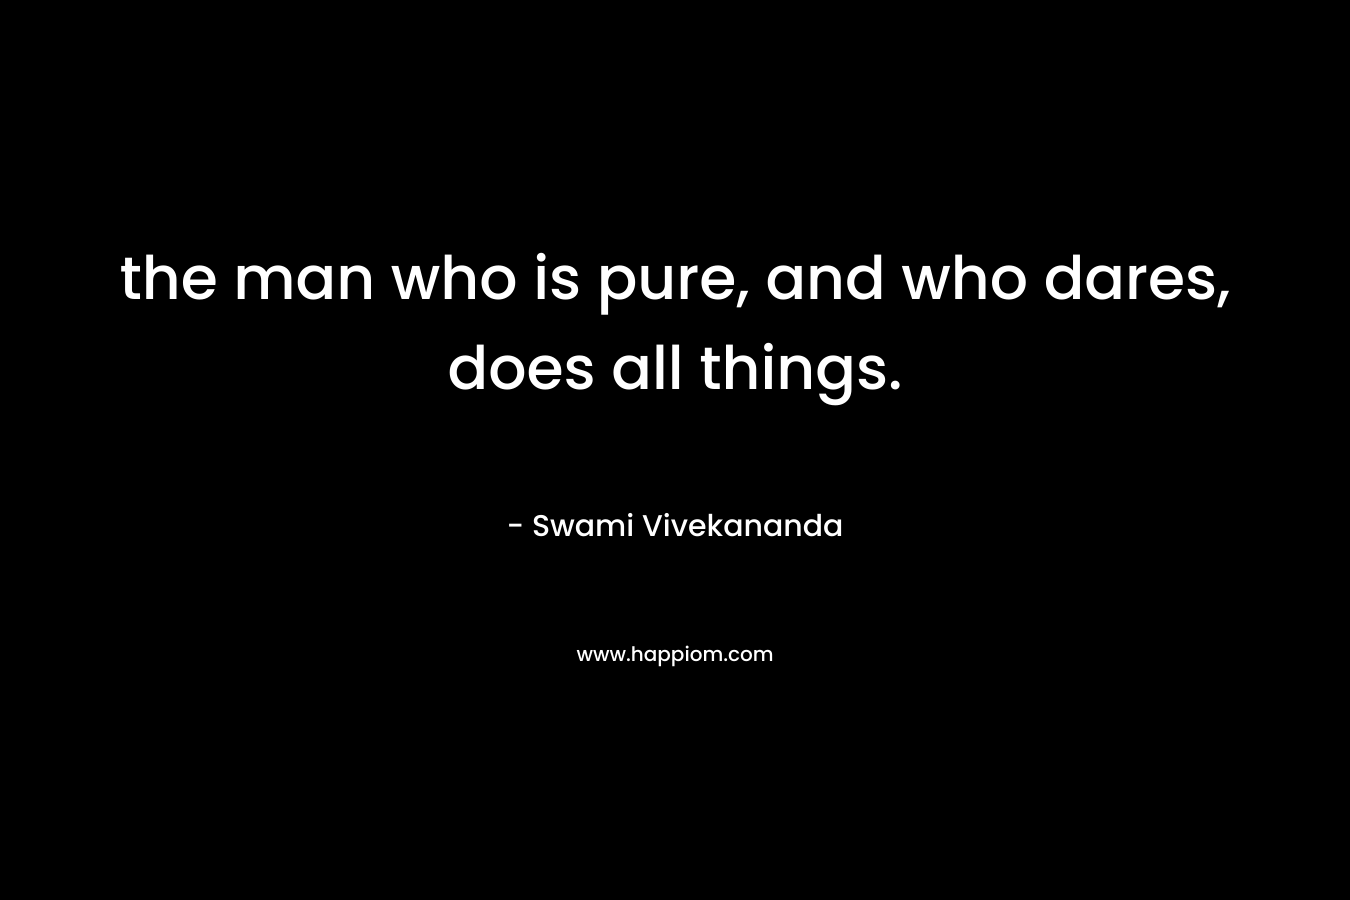 the man who is pure, and who dares, does all things. – Swami Vivekananda